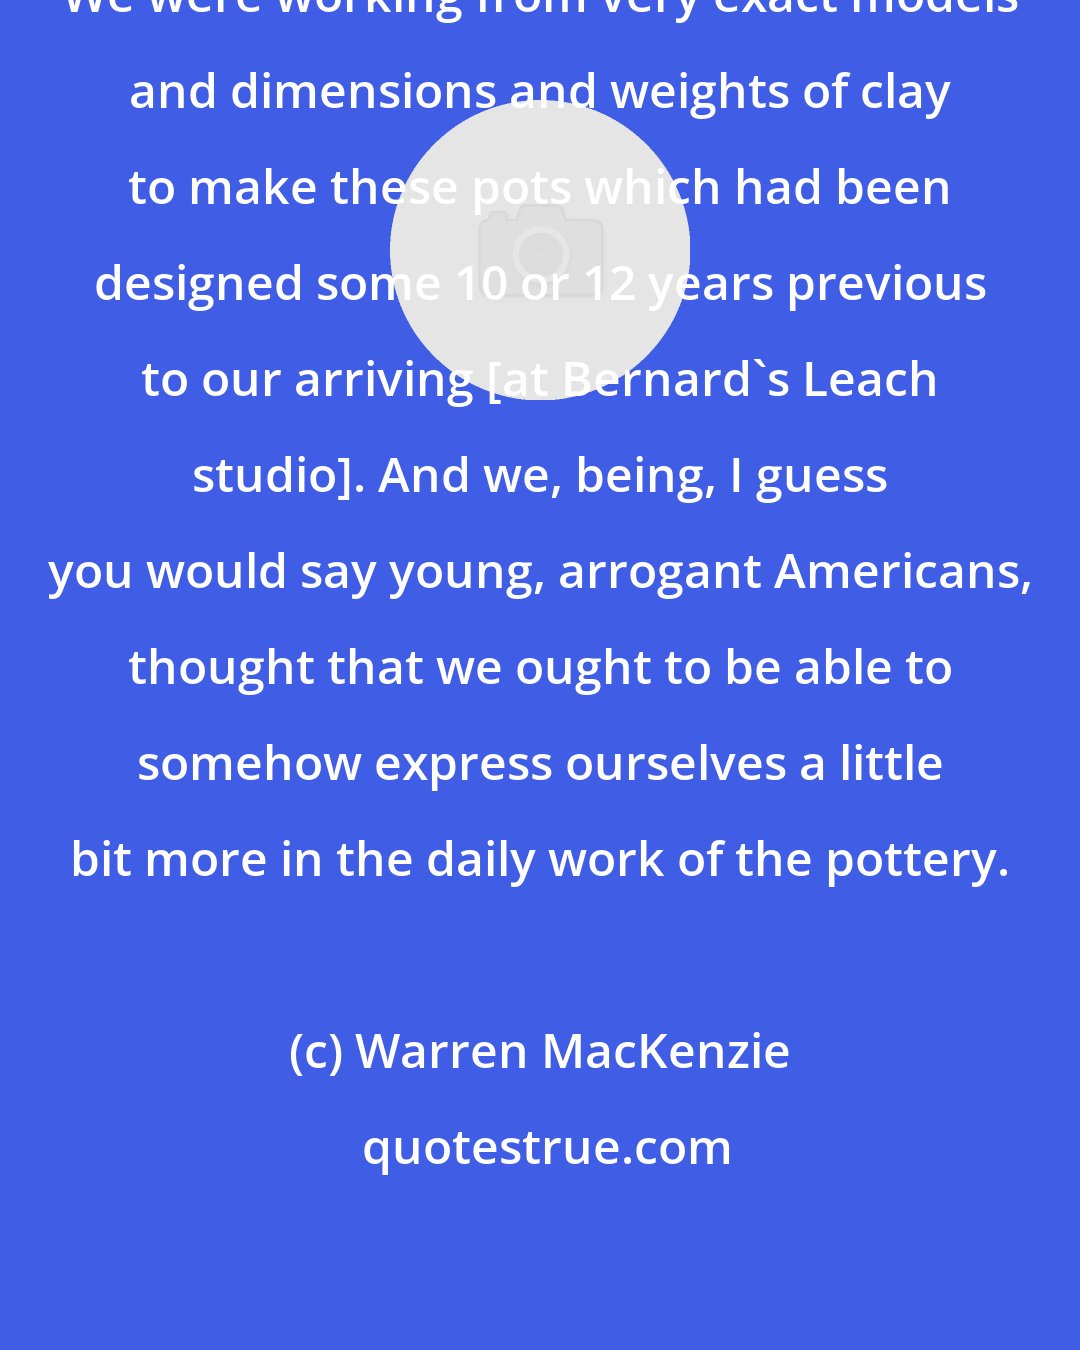 Warren MacKenzie: We were working from very exact models and dimensions and weights of clay to make these pots which had been designed some 10 or 12 years previous to our arriving [at Bernard's Leach studio]. And we, being, I guess you would say young, arrogant Americans, thought that we ought to be able to somehow express ourselves a little bit more in the daily work of the pottery.